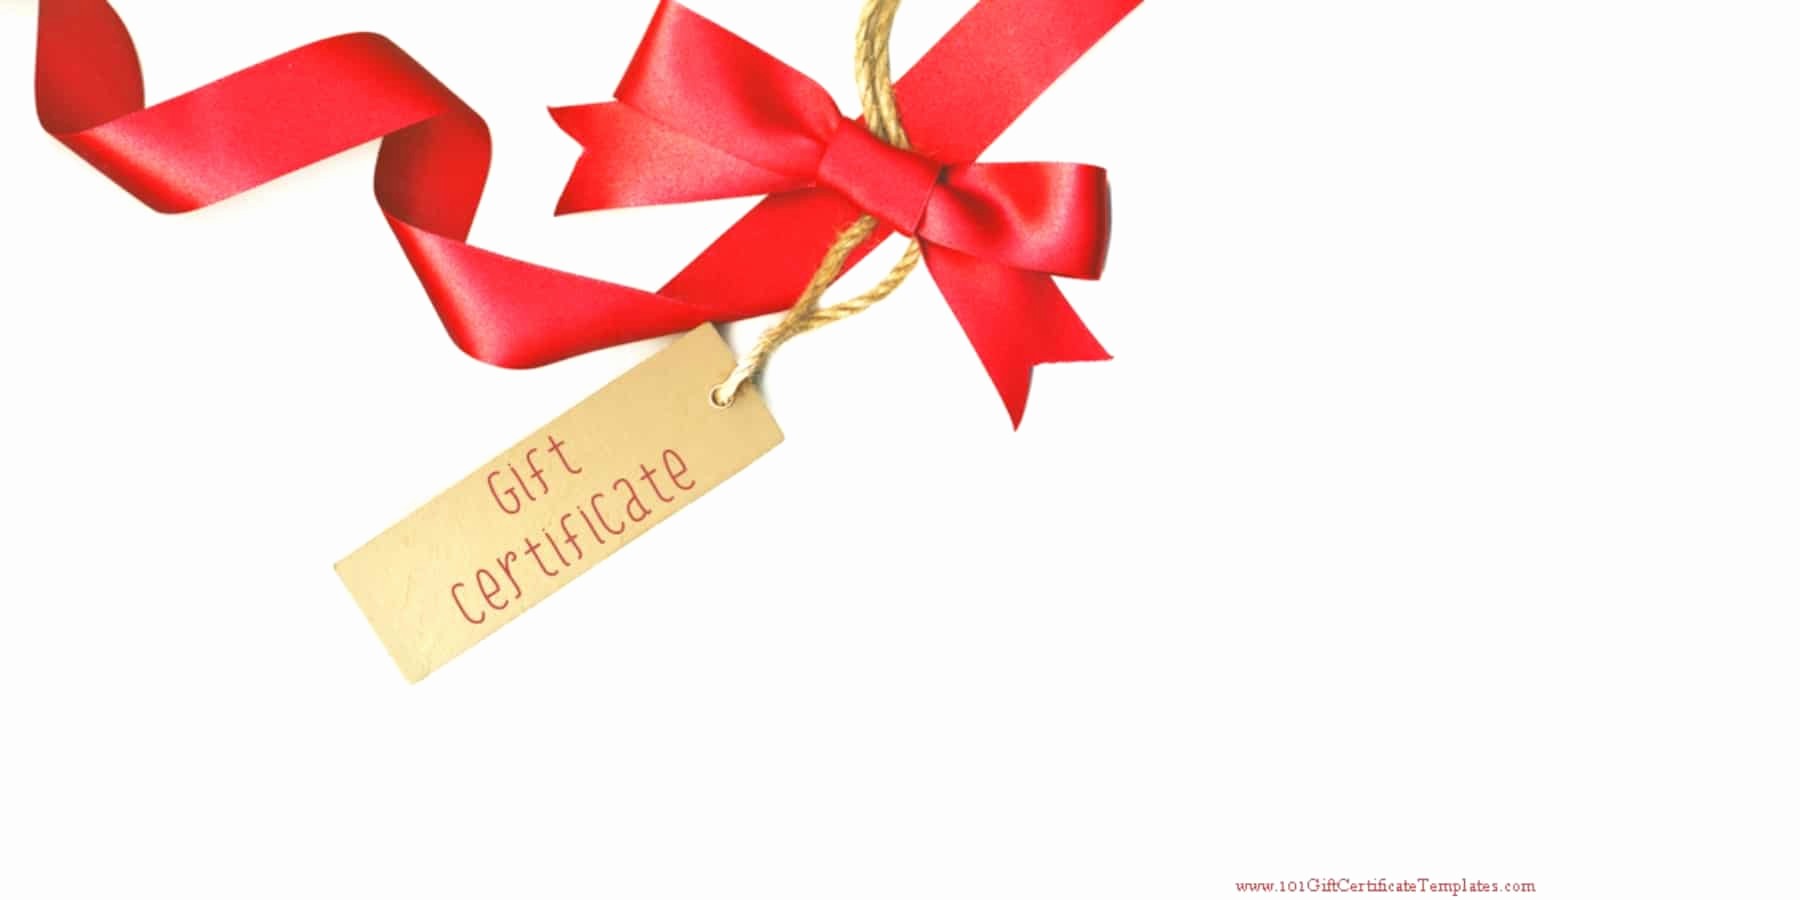 Create A Gift Certificate Free Unique Printable Gift Certificate Templates